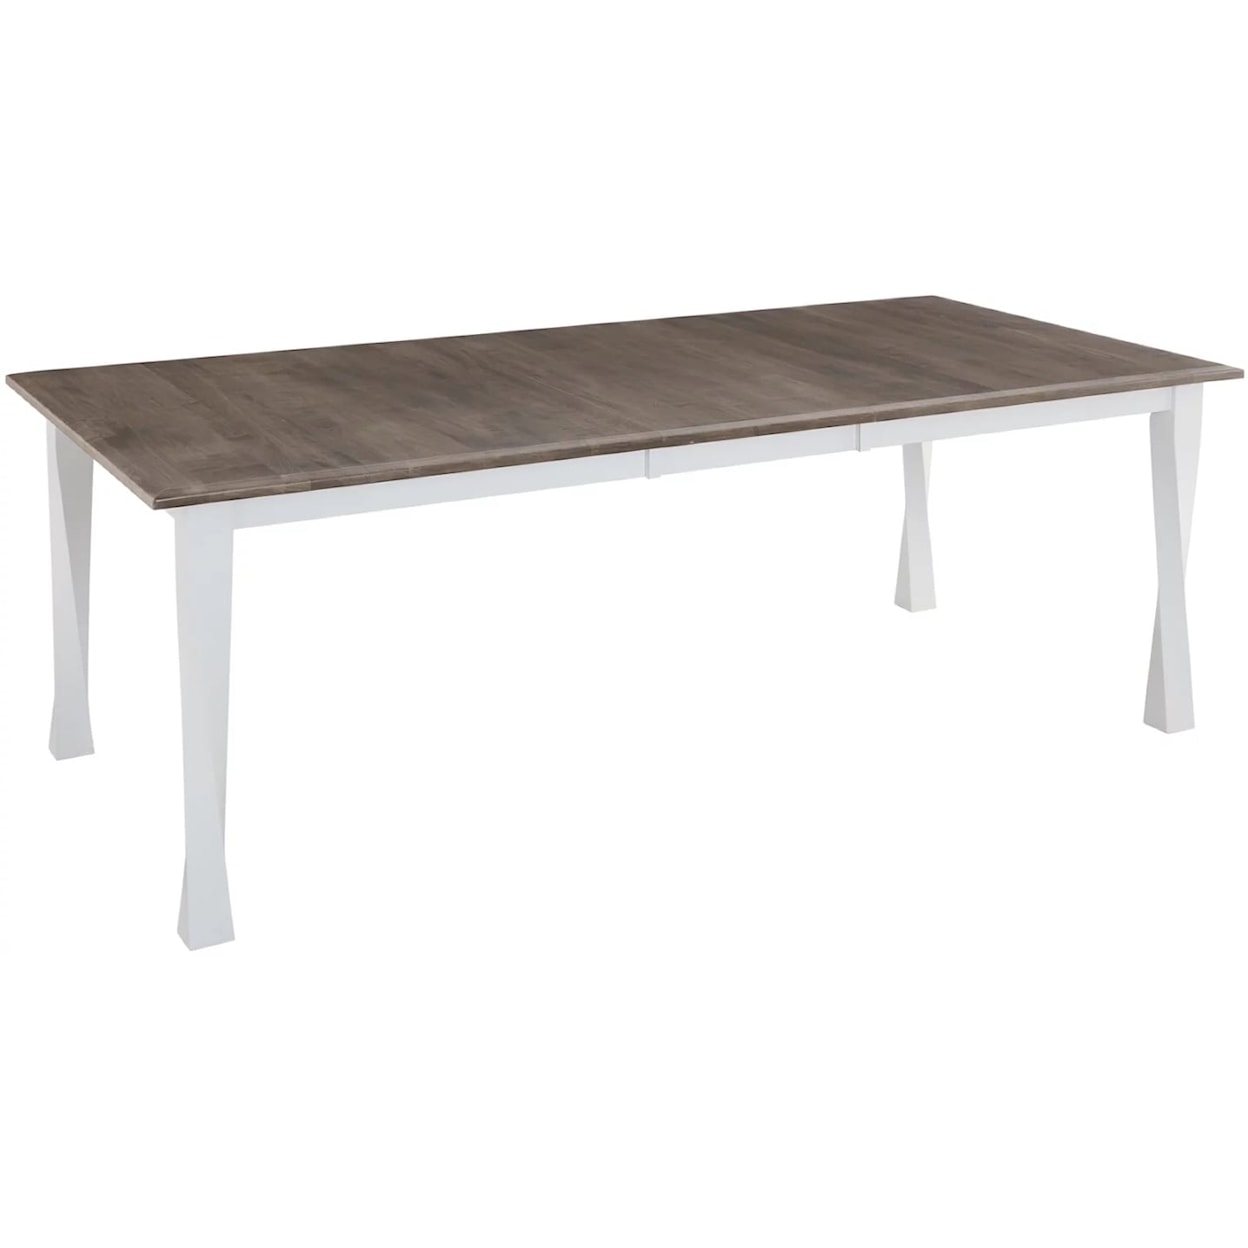 Archbold Furniture Amish Essentials Casual Dining Rectangular Dining Table with Twist Leg